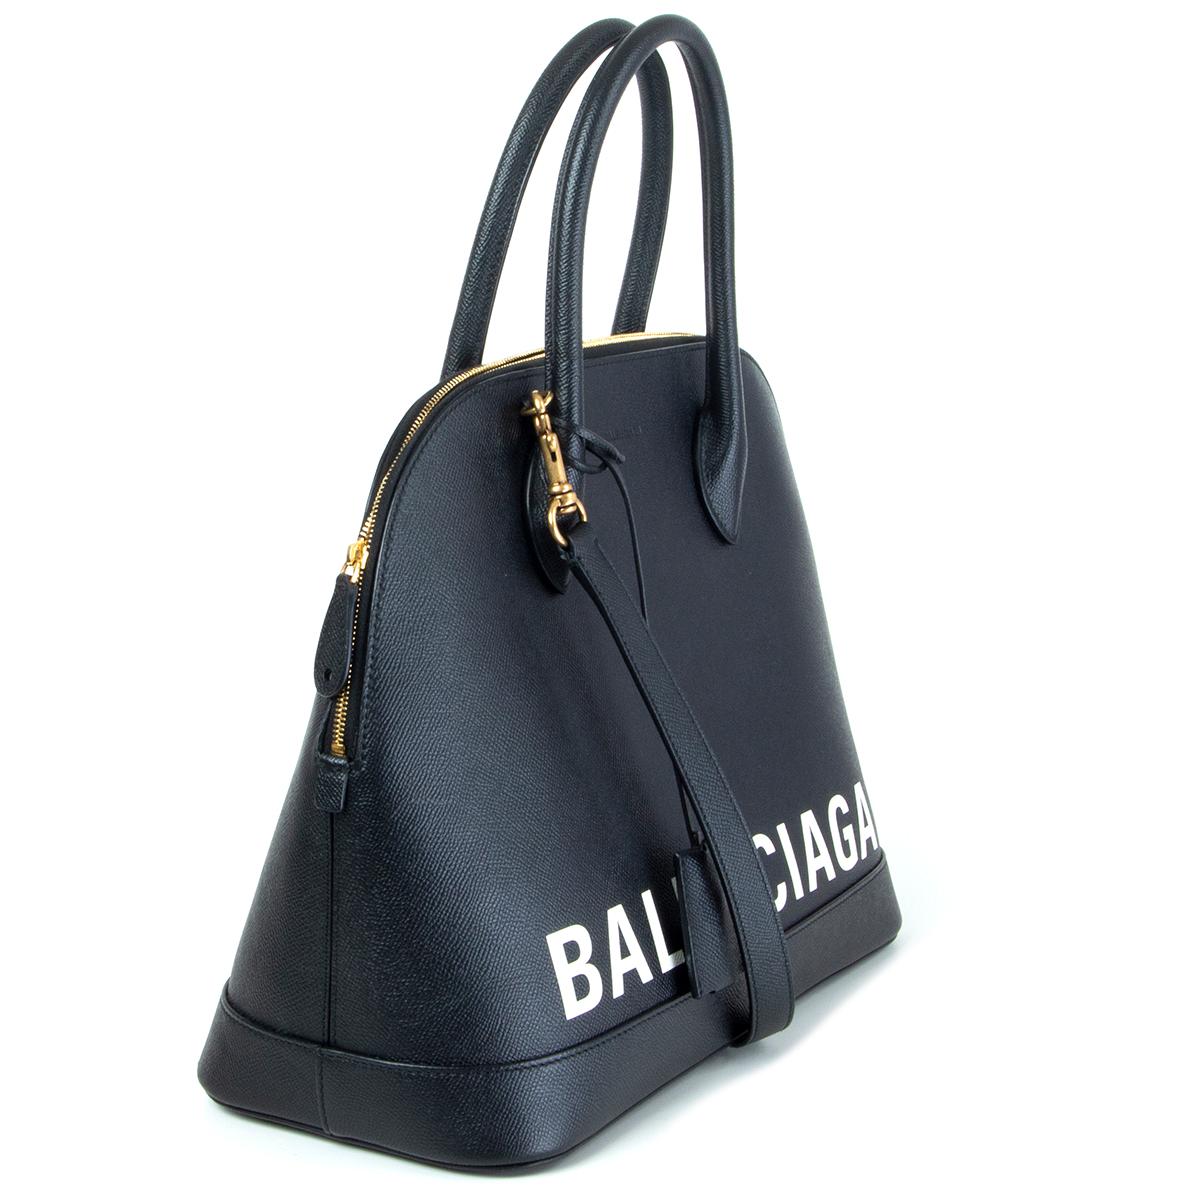 authentic Balenciaga Ville Medium graffiti logo bag in black grained calfskin with large white graffiti inspired Balenciaga front logo. Opens with a top zip fastening with padlock and key. Has a back patch pocket and a removable and adjustable